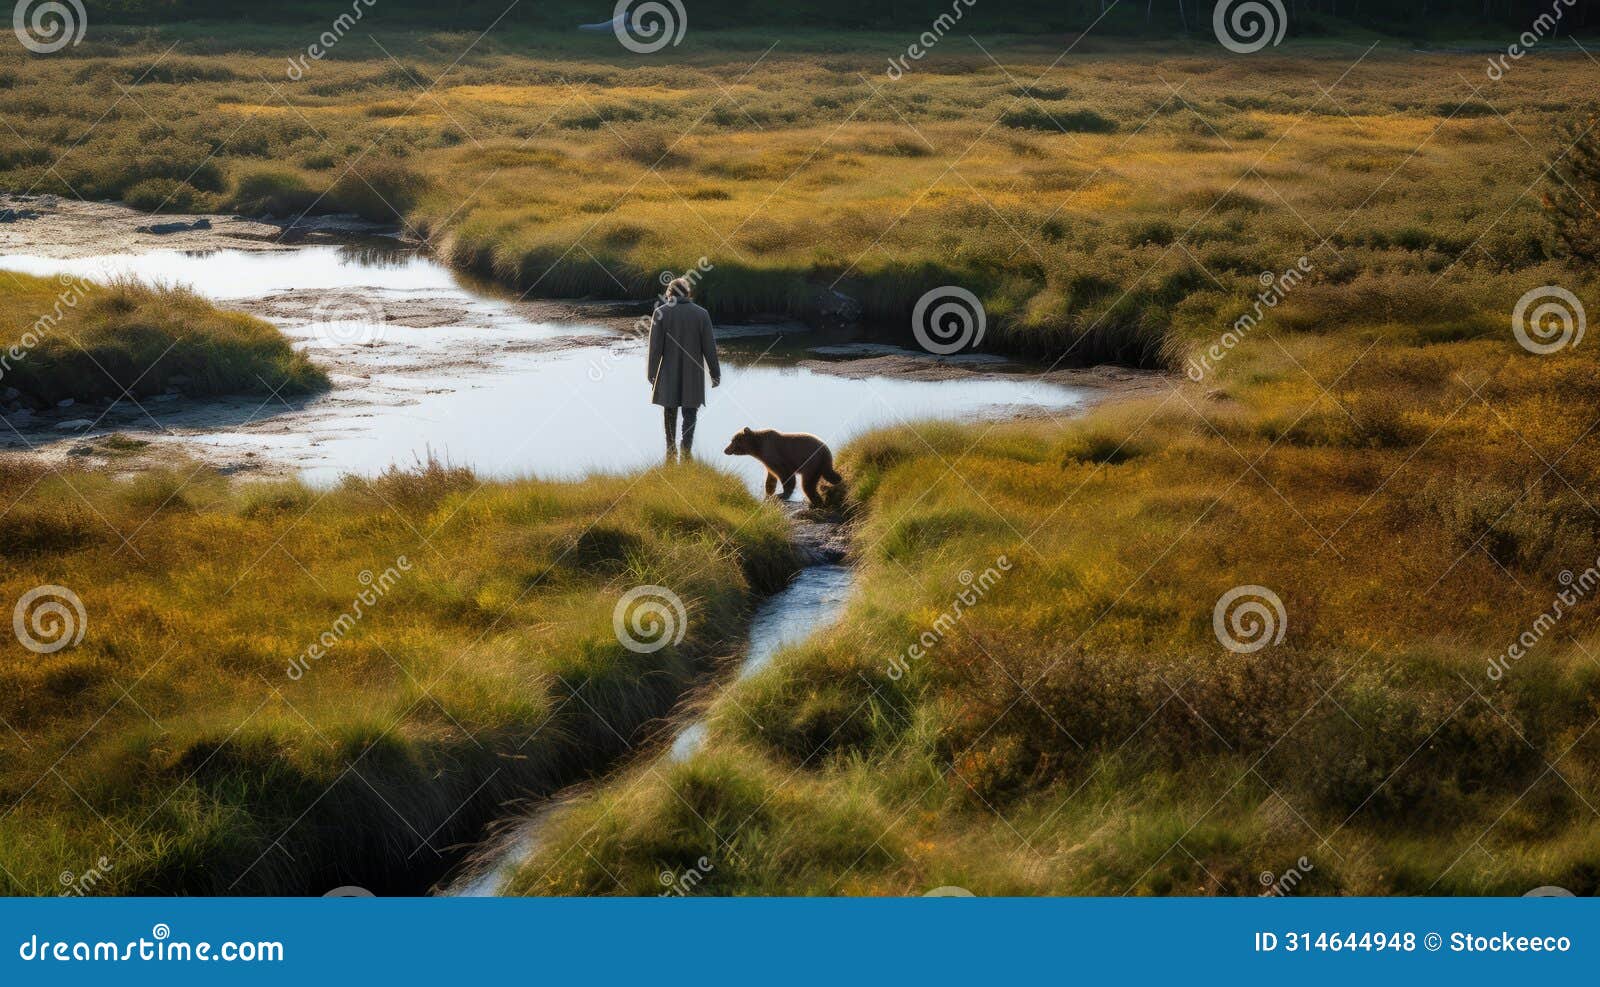 man and dog walking across stream in earthy sigma 85mm style